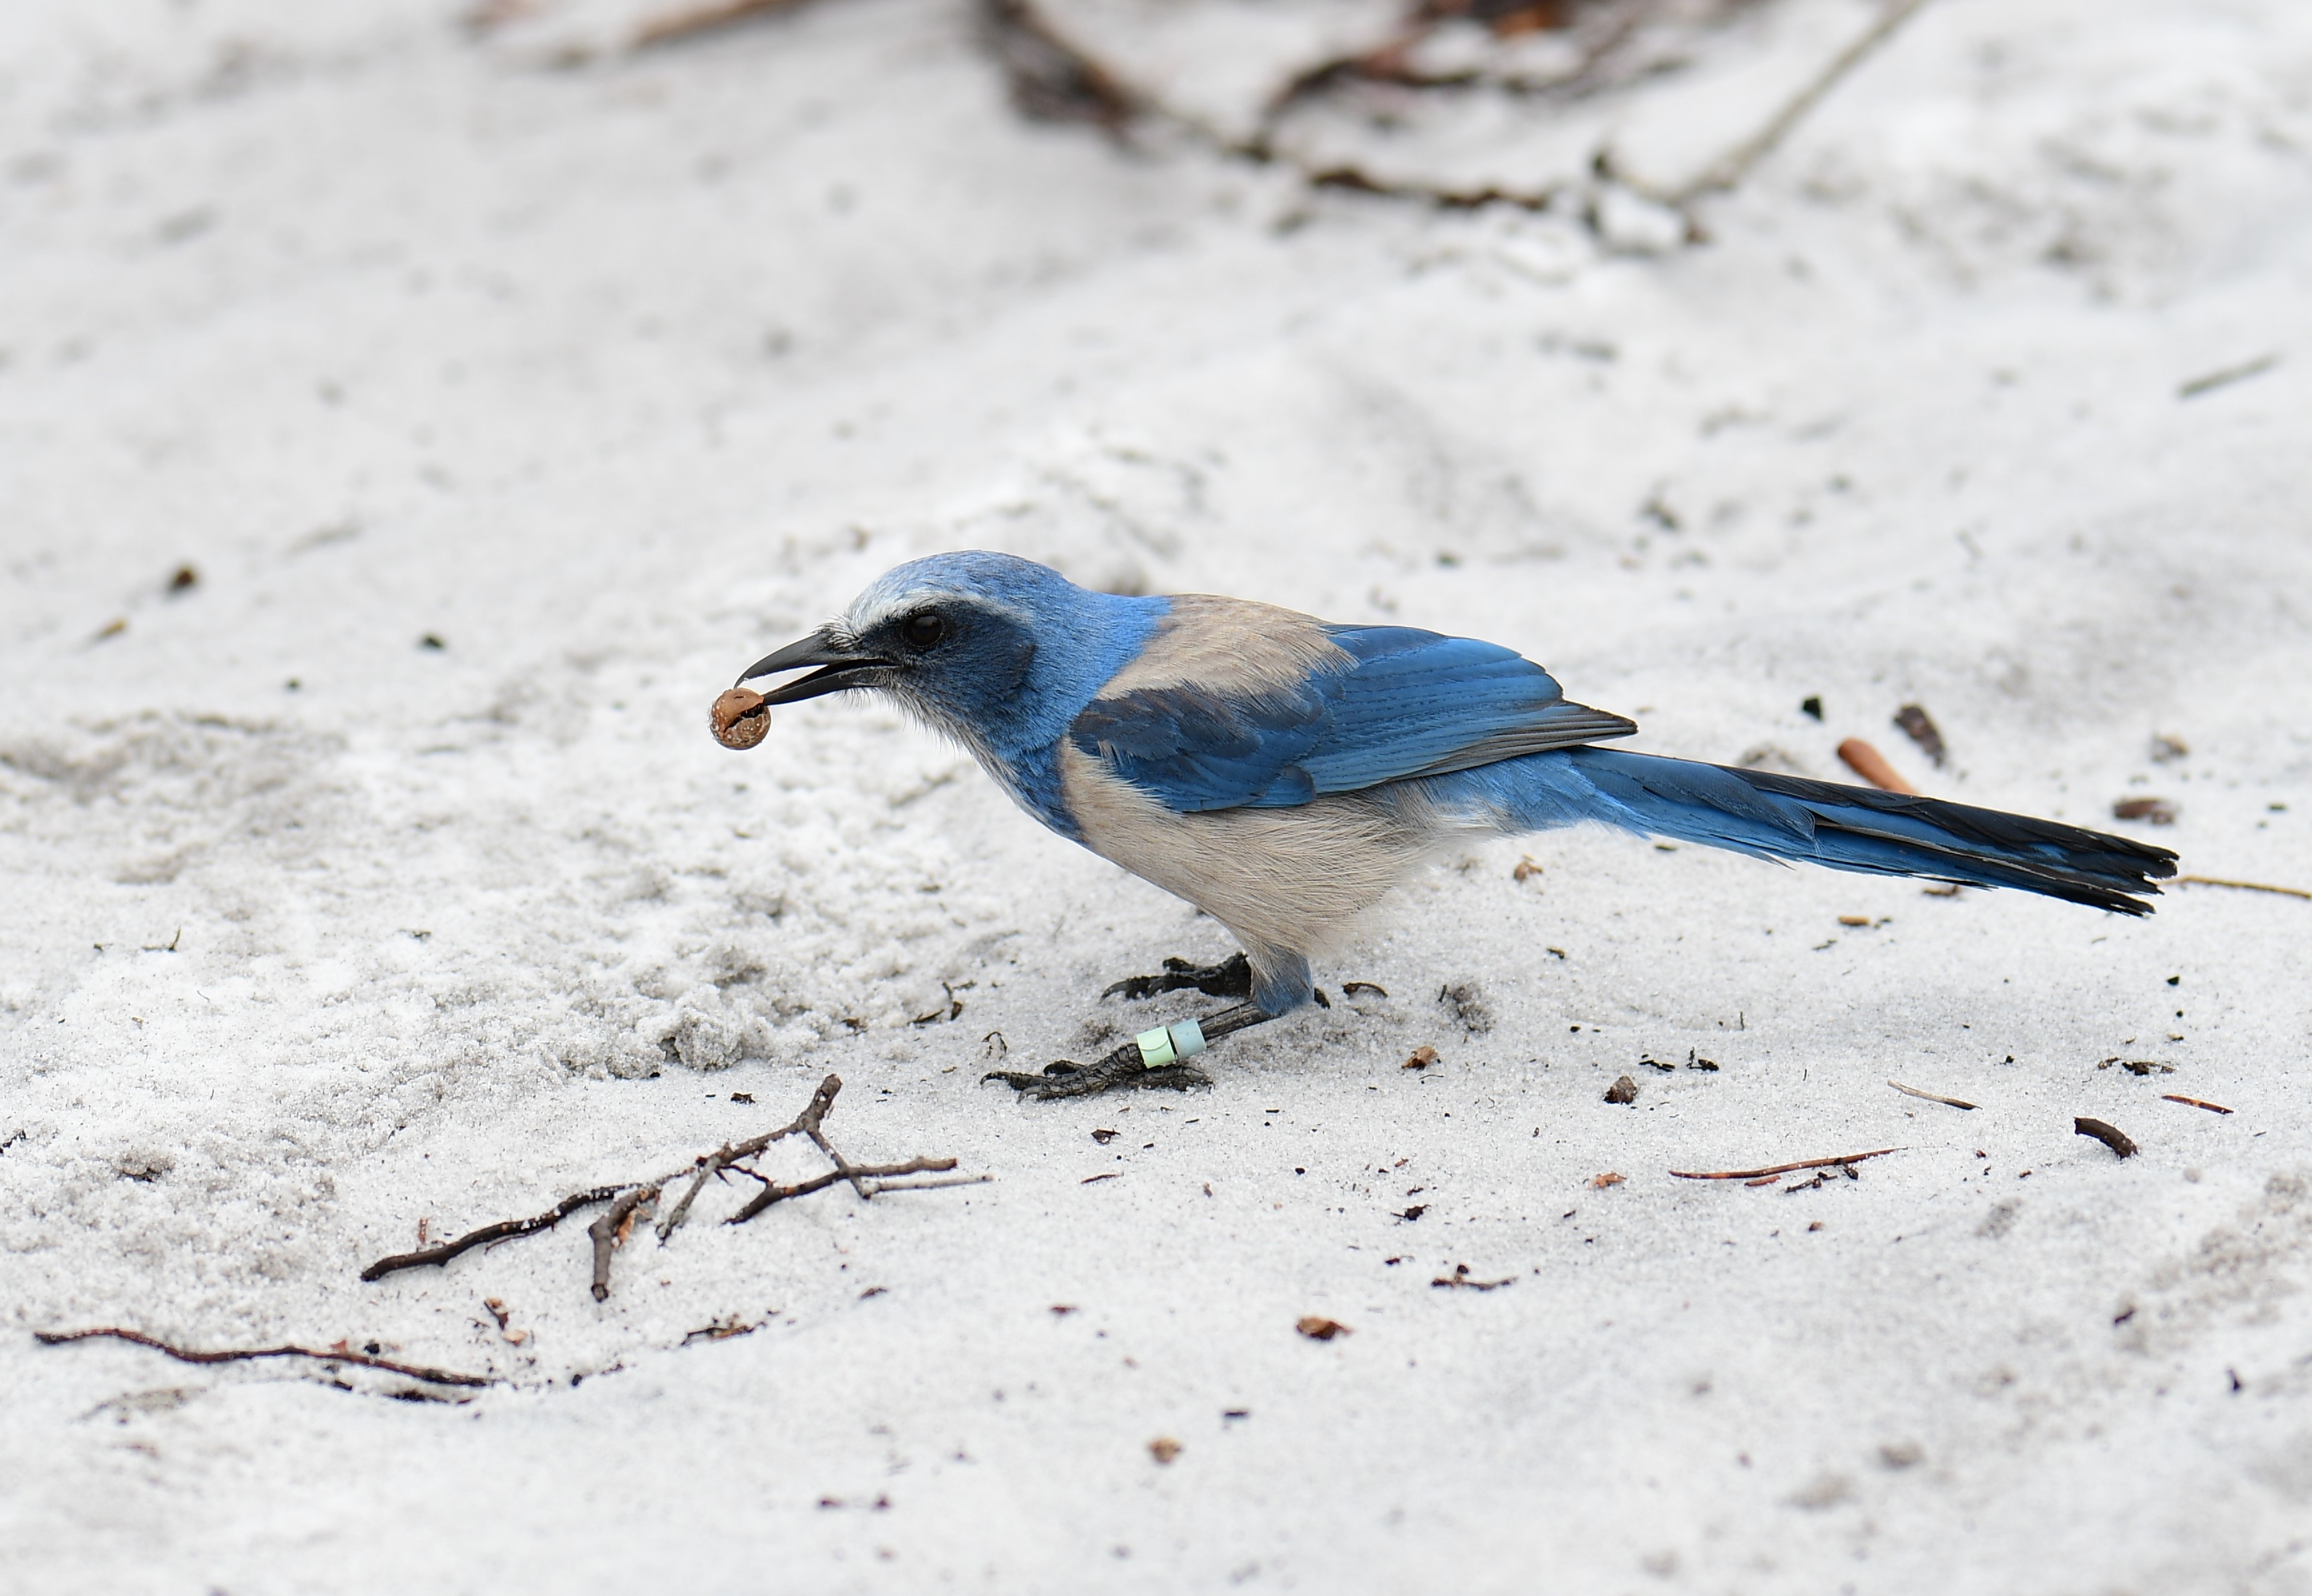 Florida Scrub-Jay with a nut in its beak, standing on the sand. Photo: John Wolaver.